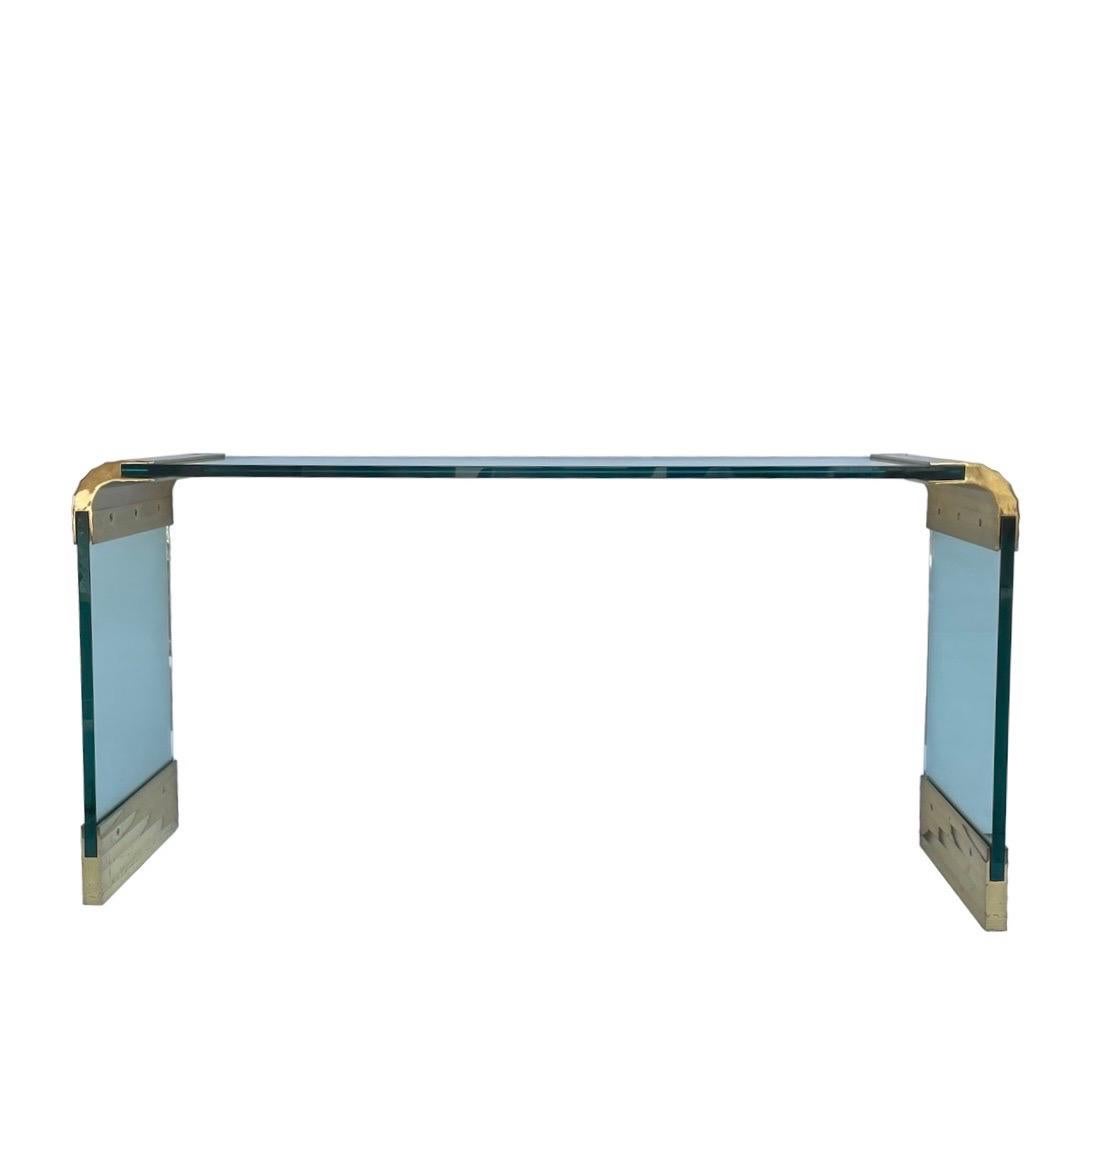 Stunning 1970s Leon Rosen designed for Pace brass and glass waterfall console.